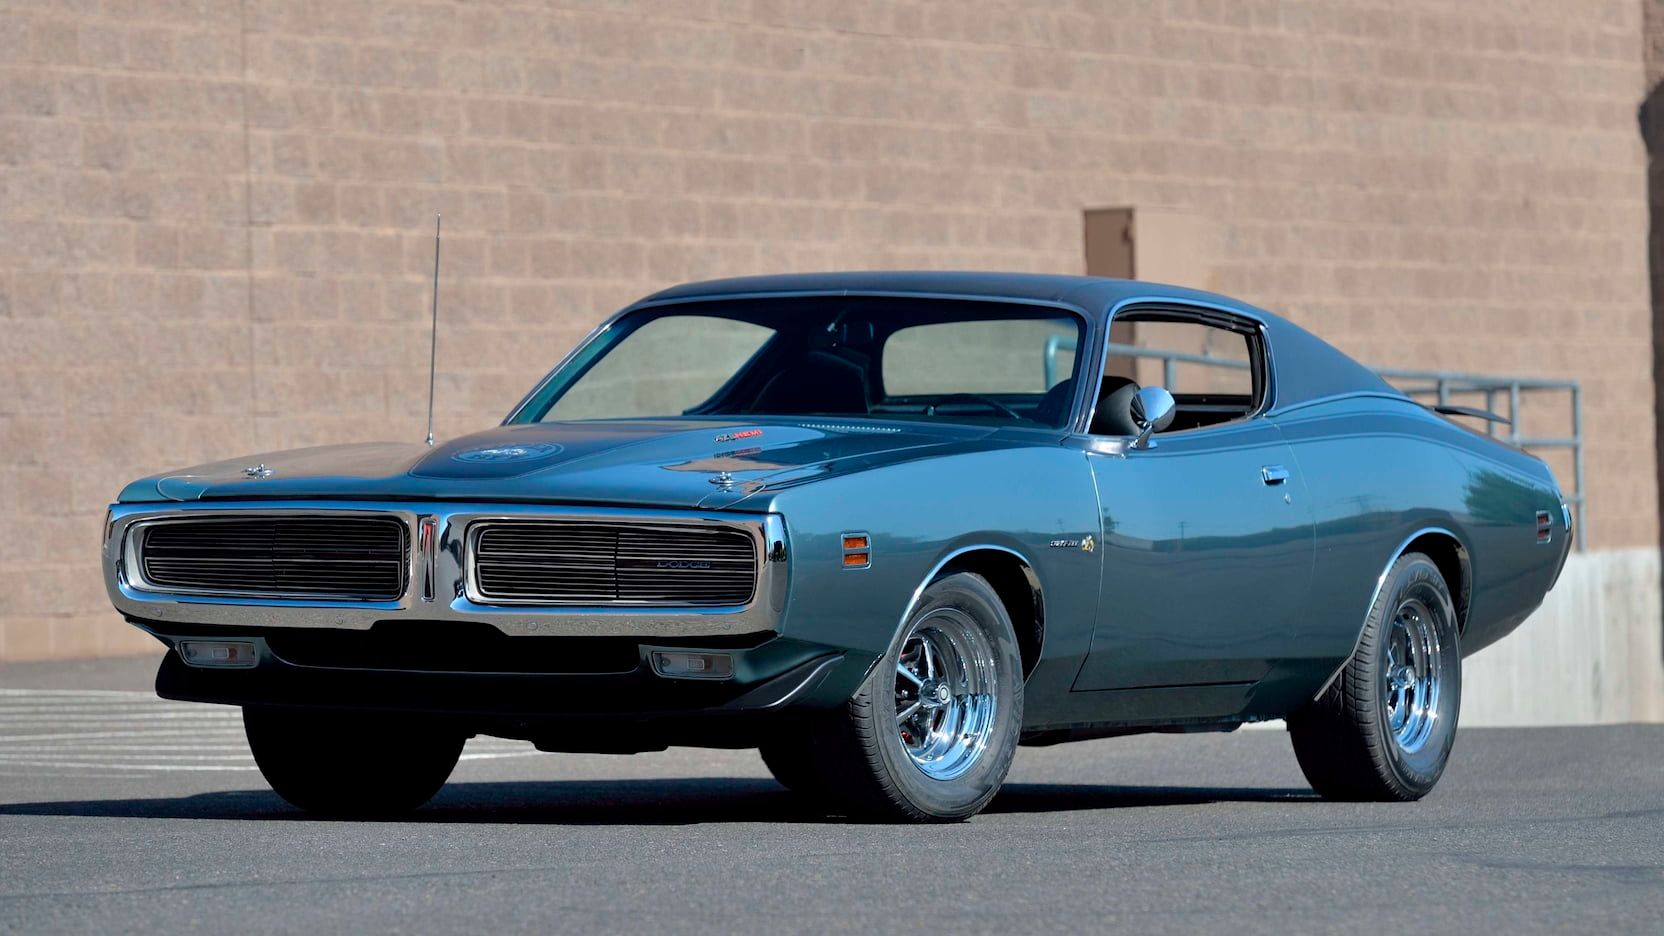 1971 Dodge Charger Super Bee Hemi, front quarter view